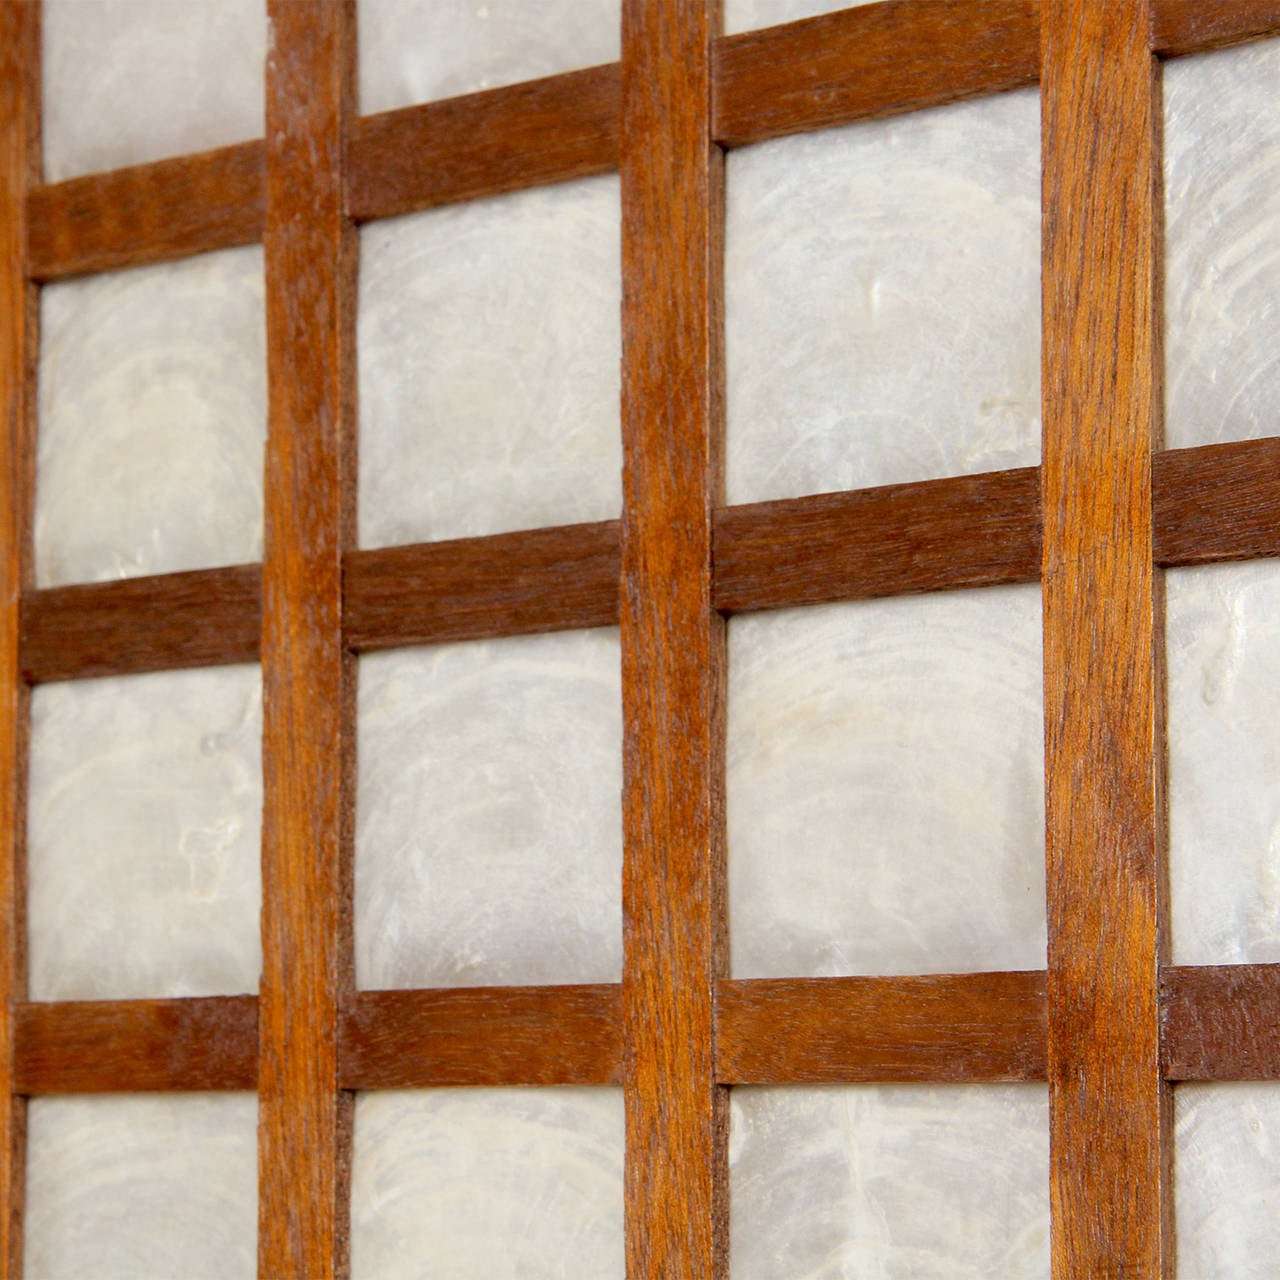 A well scaled and finely crafted gridded panel having a handmade lap jointed mahogany frame and inset with expressive and translucent squares of capiz shell.